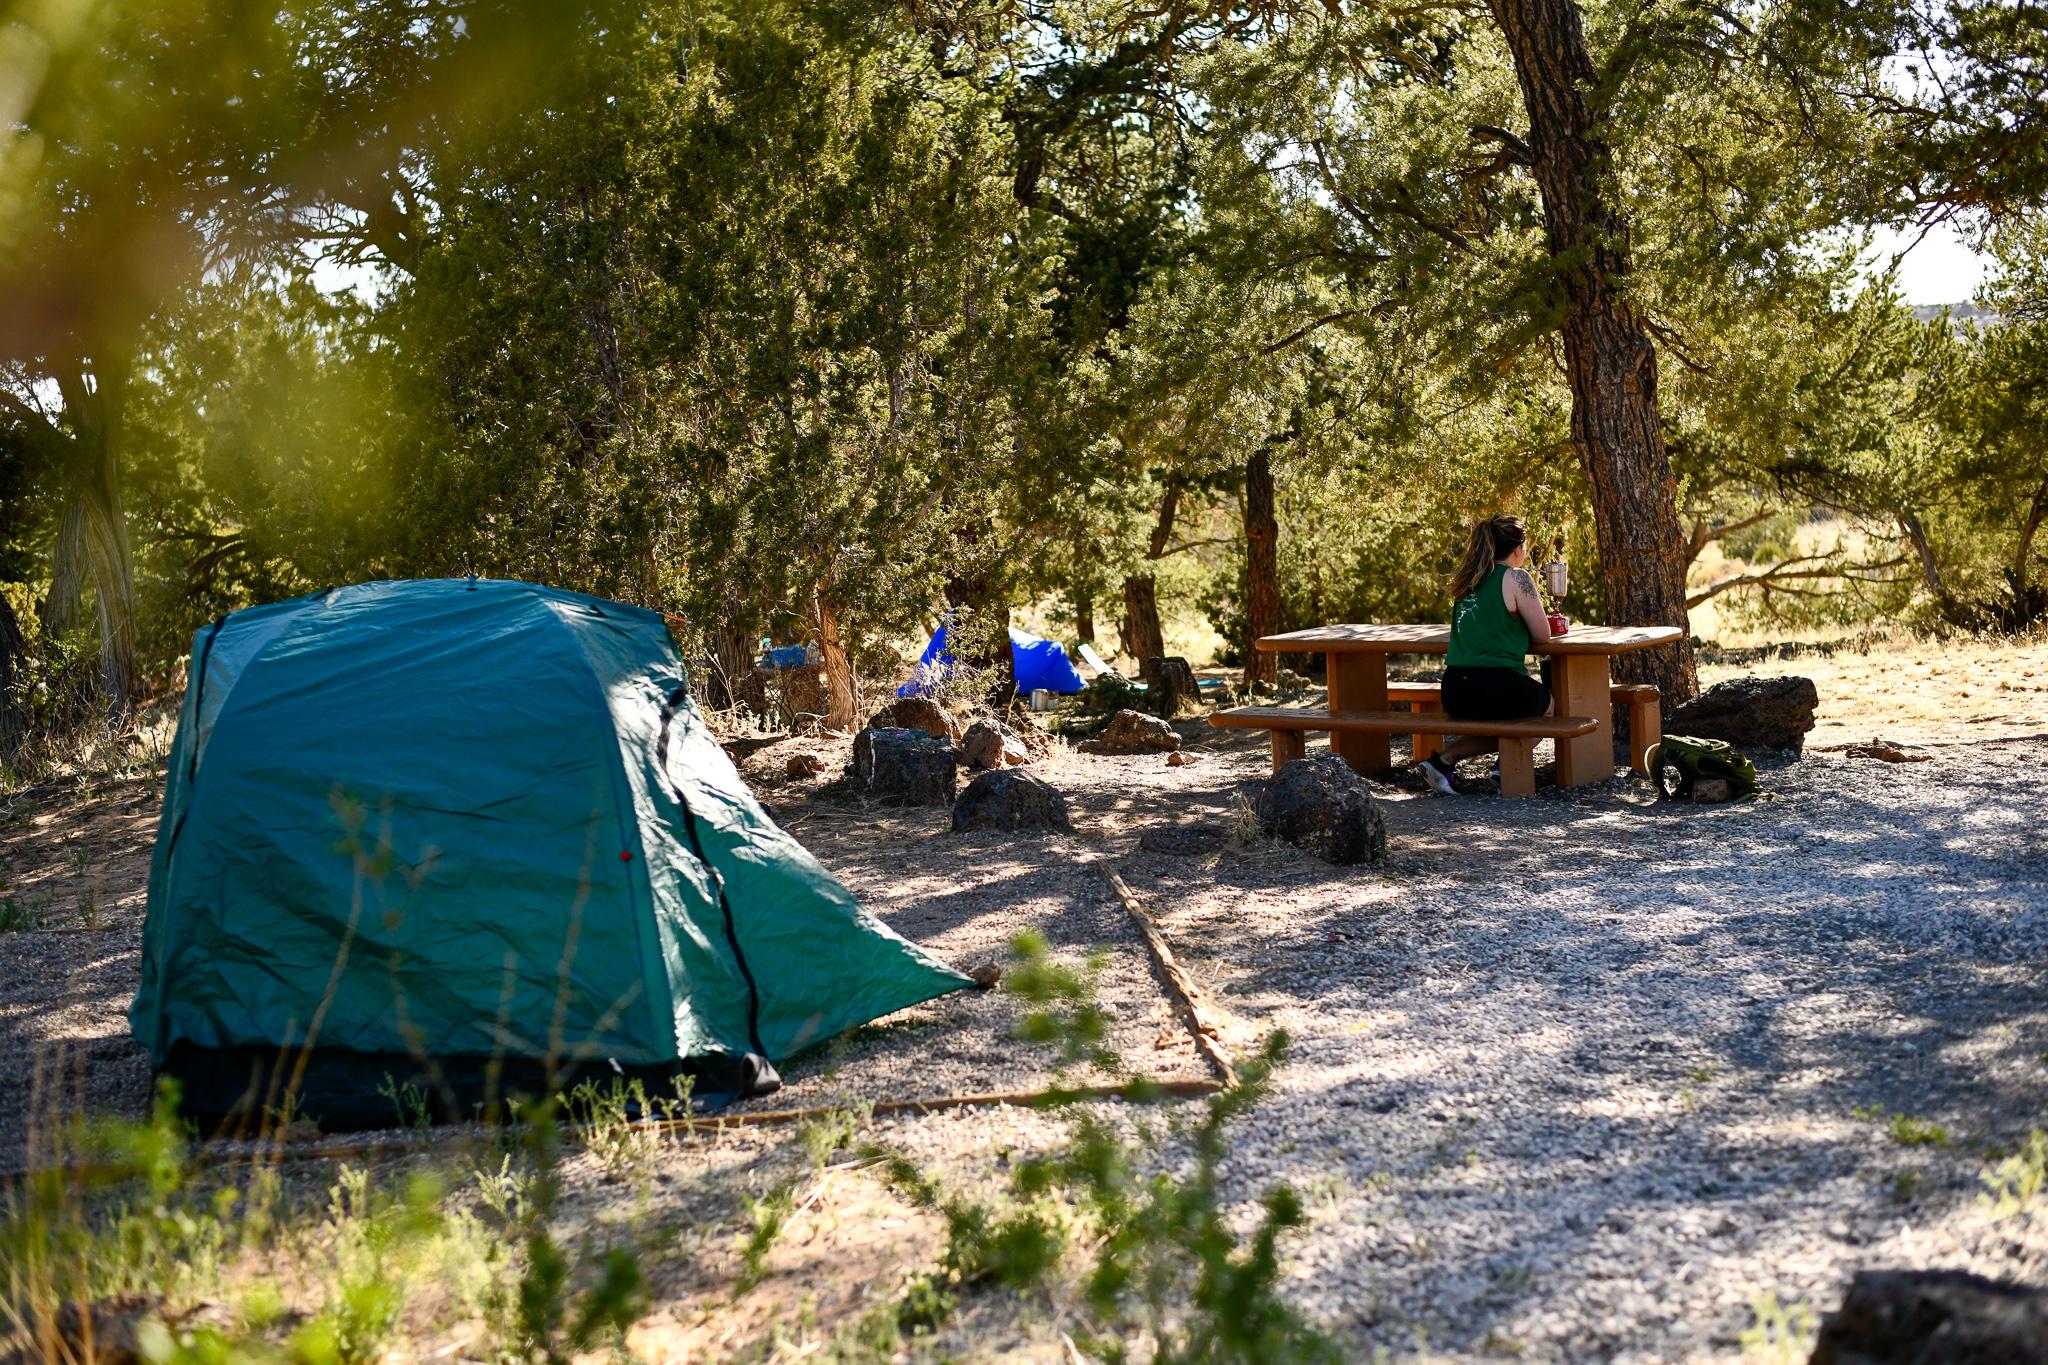 A campsite with a tent set up and a person sitting at a picnic table.